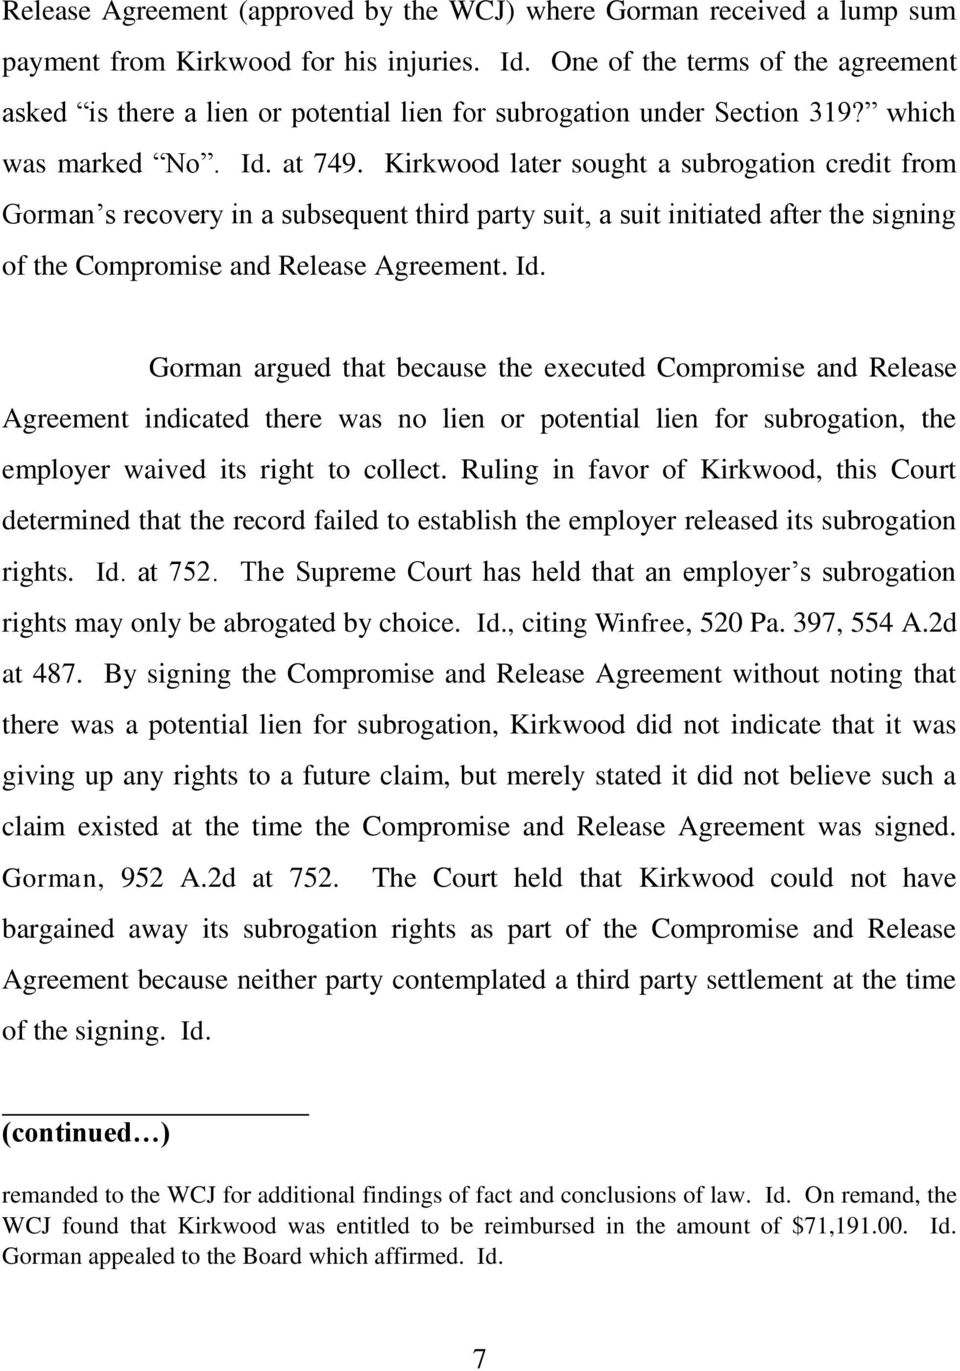 Kirkwood later sought a subrogation credit from Gorman s recovery in a subsequent third party suit, a suit initiated after the signing of the Compromise and Release Agreement. Id.